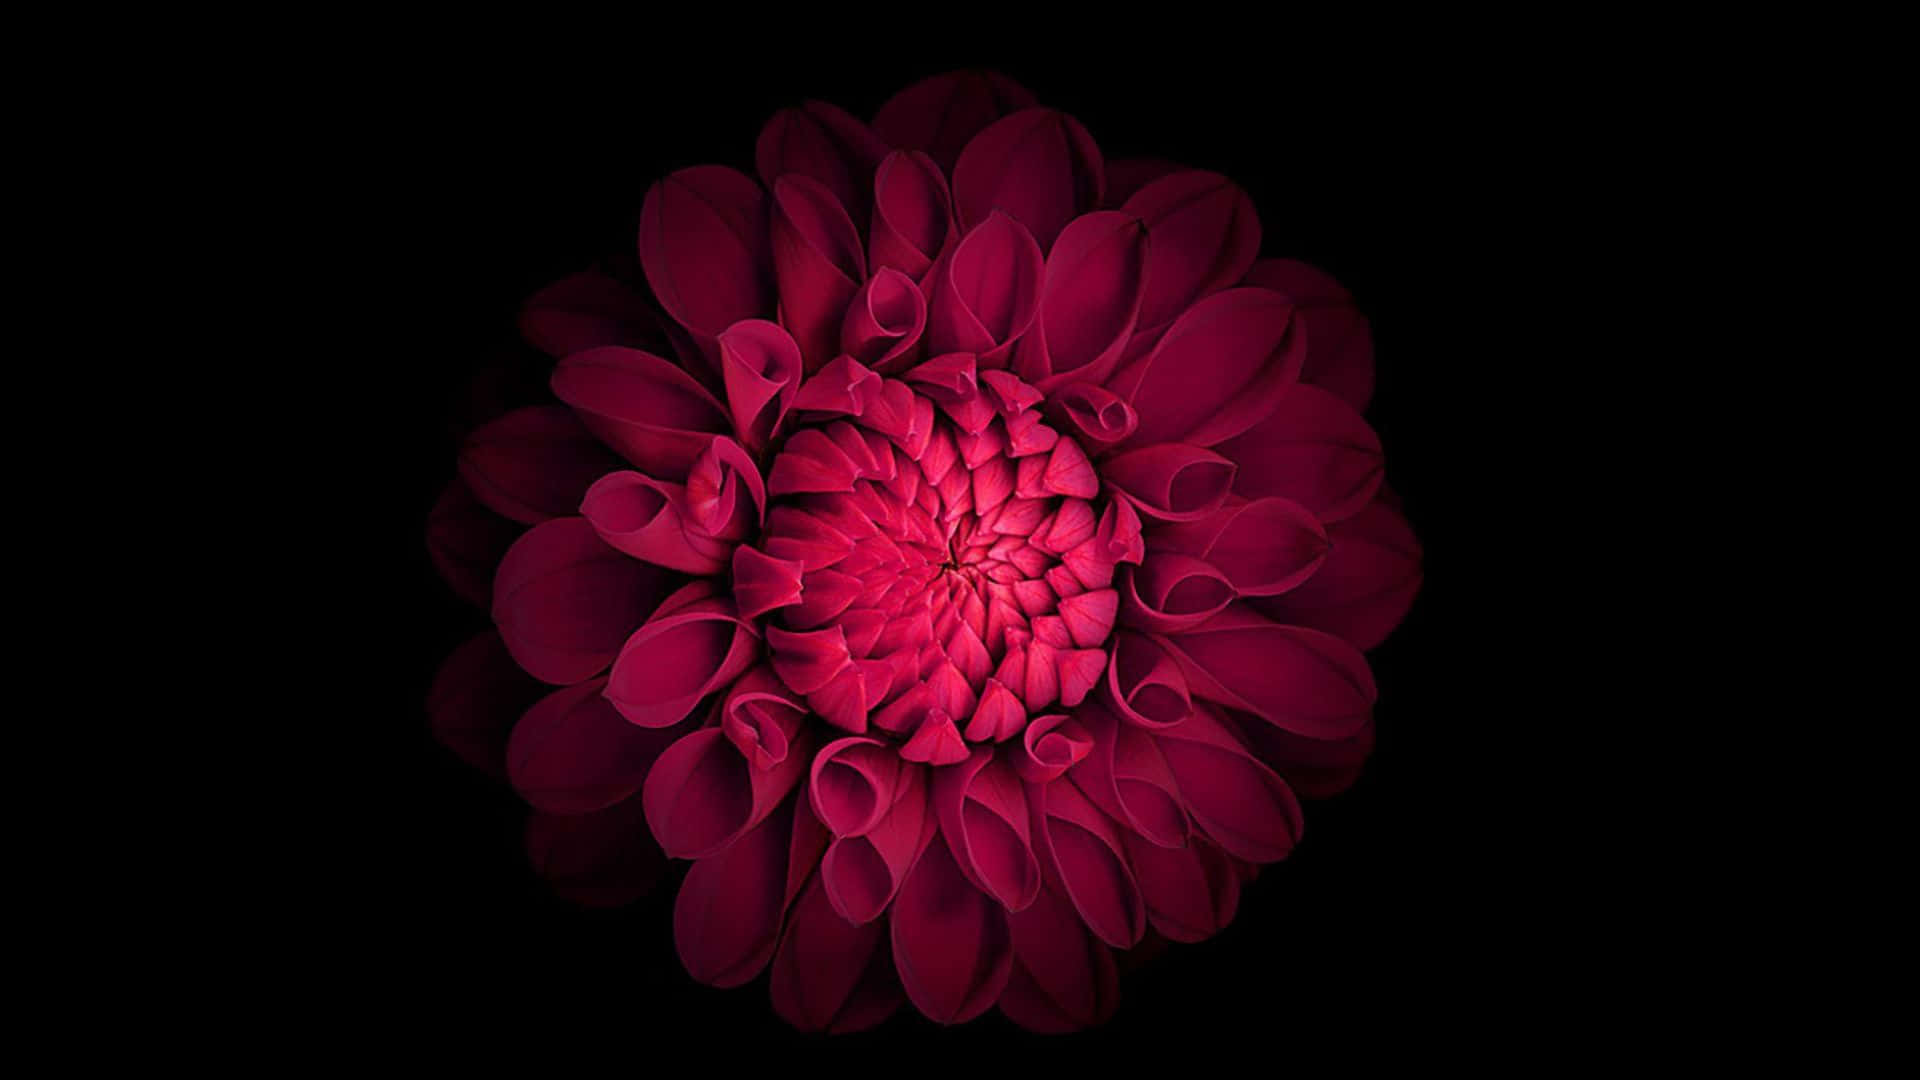 A Red Flower On A Black Background